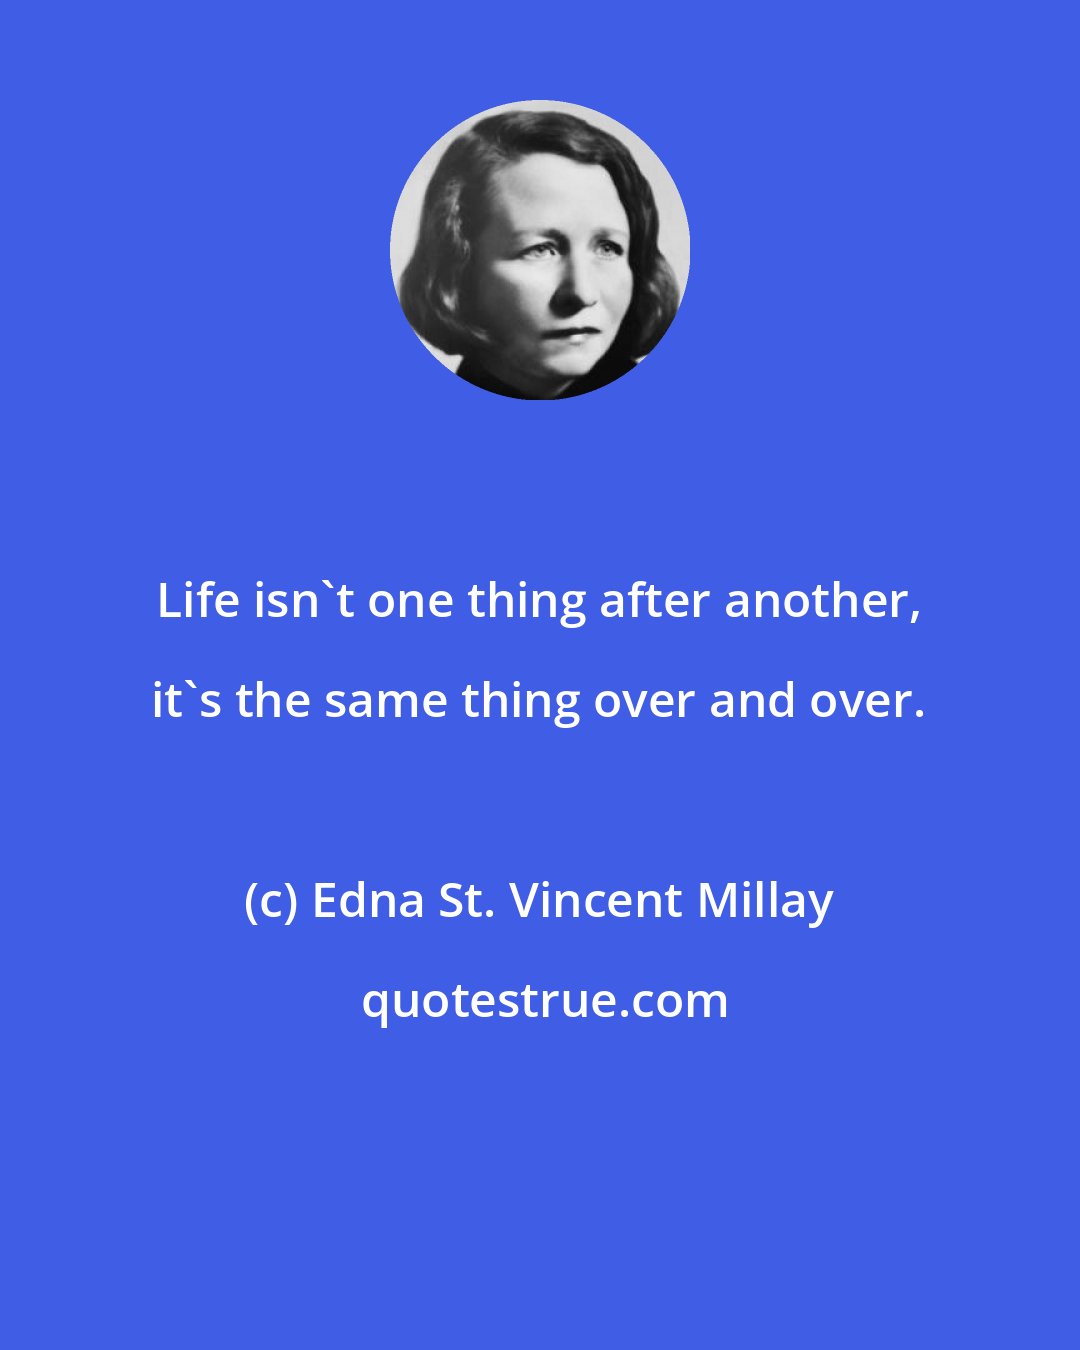 Edna St. Vincent Millay: Life isn't one thing after another, it's the same thing over and over.